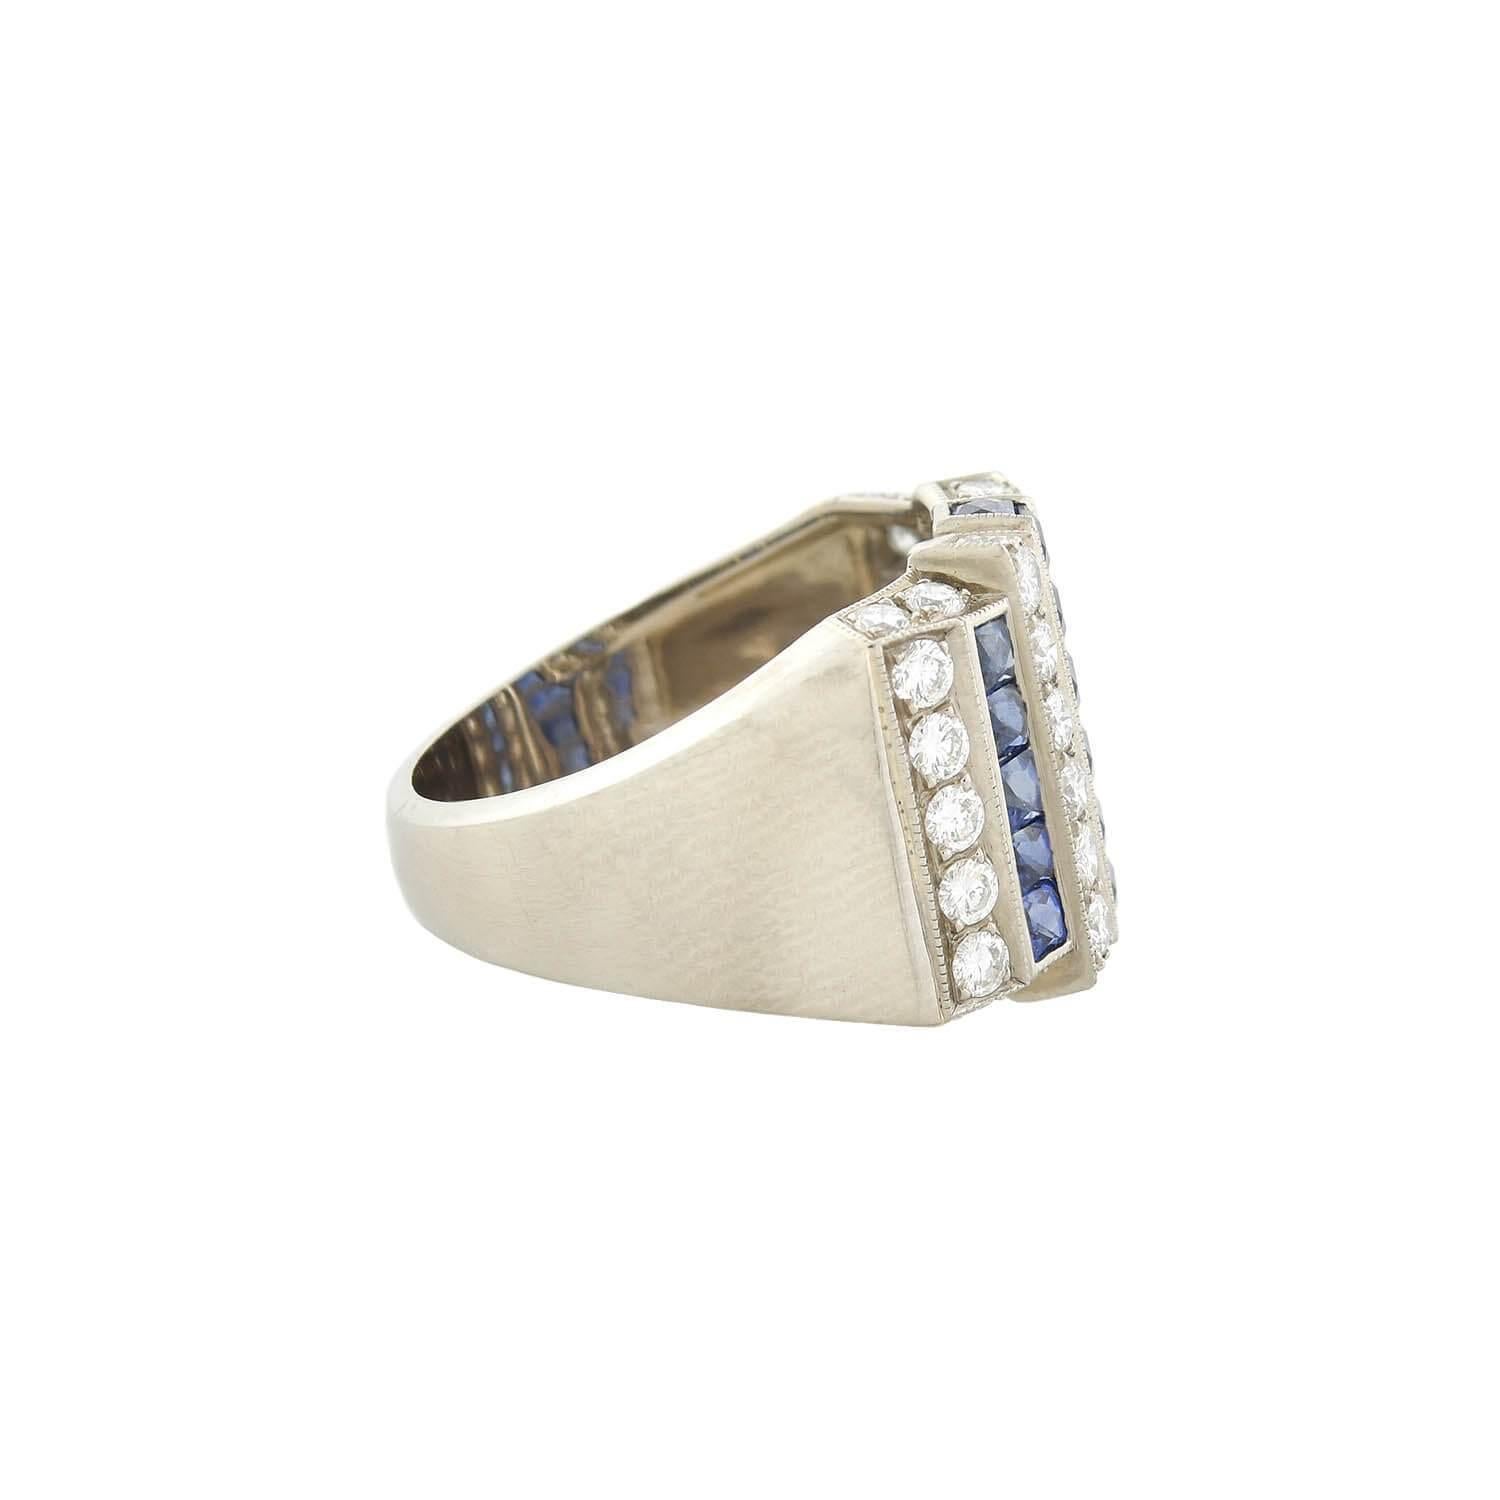 A bold diamond and sapphire ring from the Art Deco (ca1930s) era! Crafted in 18kt white gold, this fabulous piece features a bold gemstone design across its front surface. Three rows of glittering French Cut sapphires alternate with four rows of